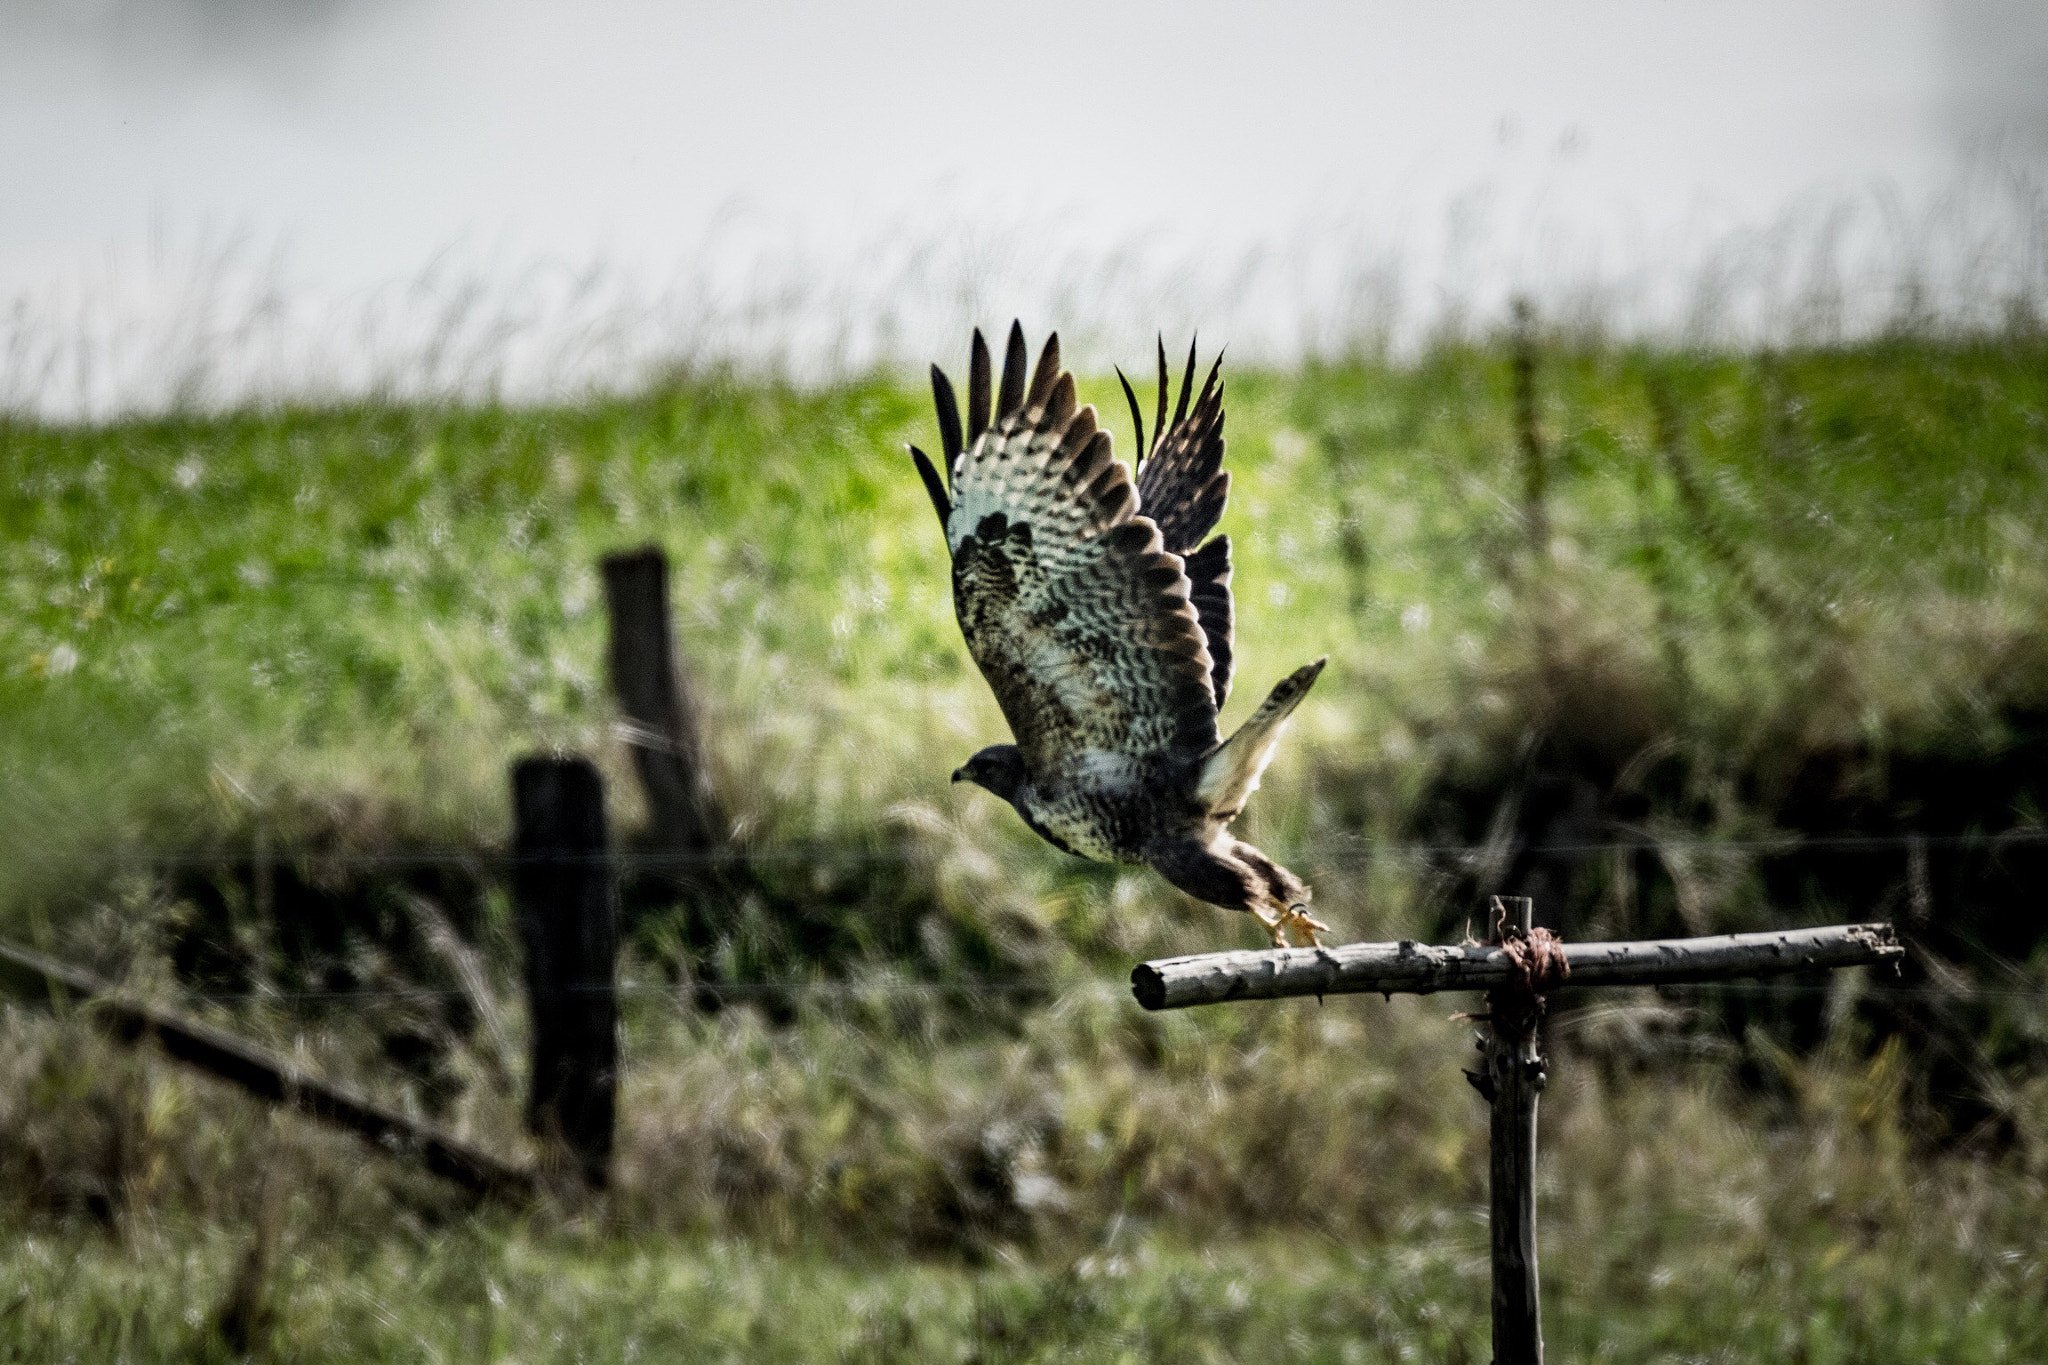 Nikon D5300 + Sigma 150-600mm F5-6.3 DG OS HSM | C sample photo. I wish i could fly!!! photography